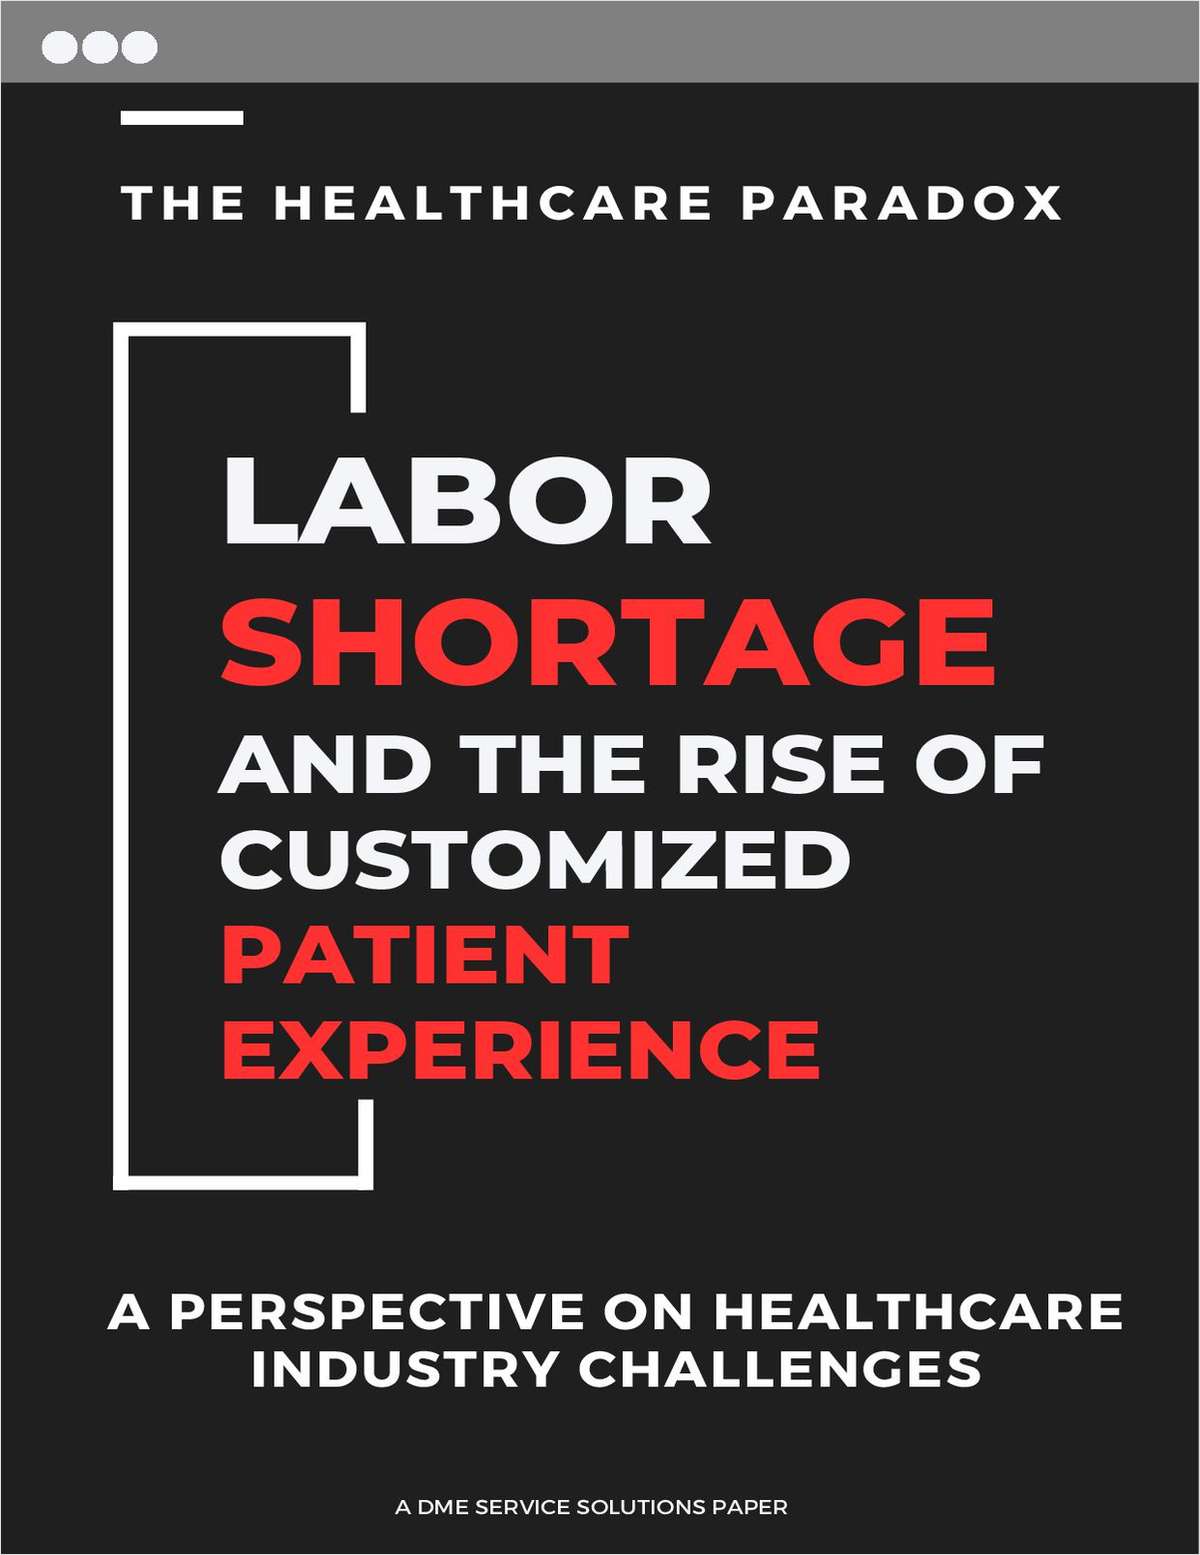 The Healthcare Paradox: Labor Shortage and The Rise of Customized Patient Experience